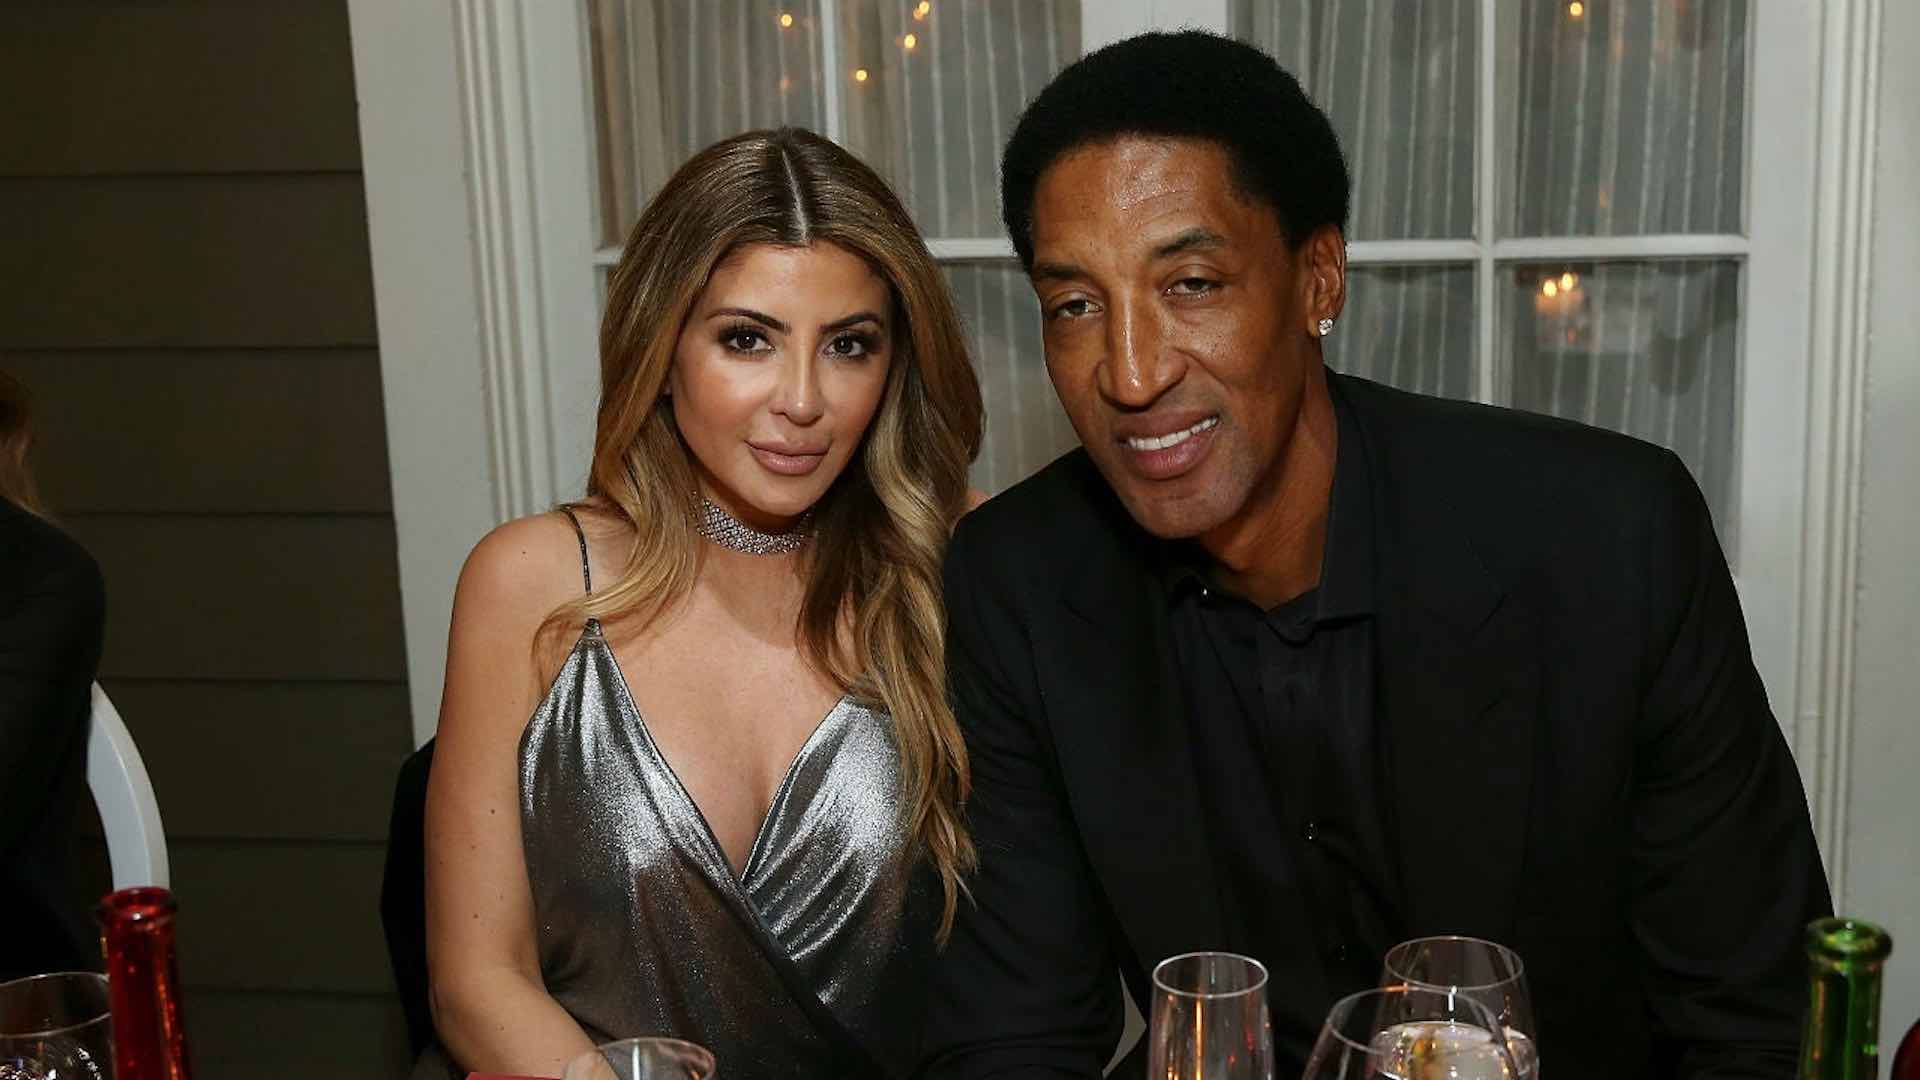 Gain the edge in the game of fortunes! Scottie Pippen stirs special secrets about Michael Jordan, cleverly challenging his net worth. Click and court the controversy!